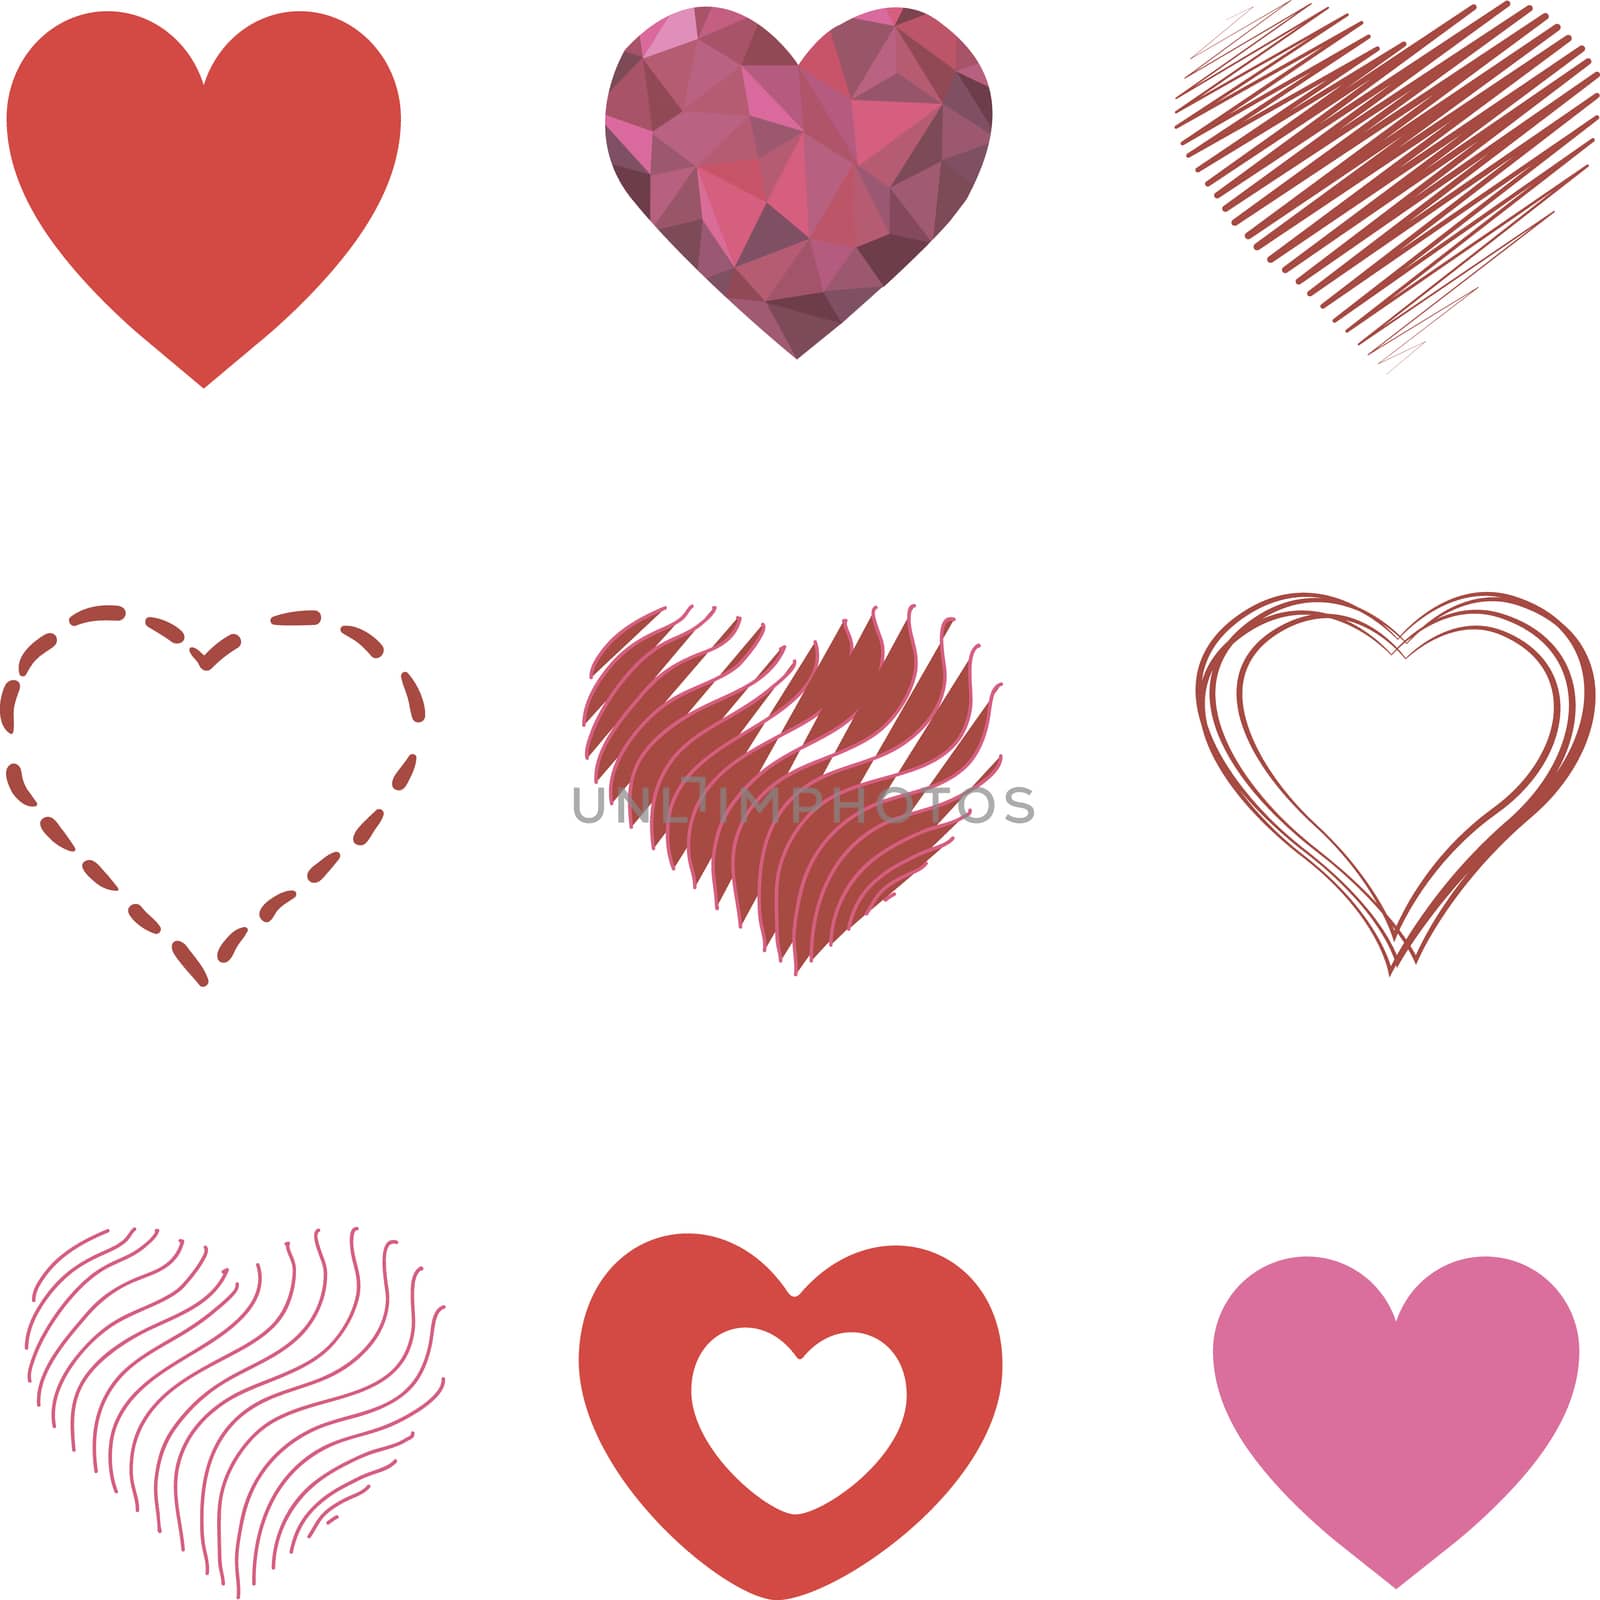 Pattern of 9 red romantic hearts different. Heart and Love Icon Symbol isolated on white background. Valentine's day pattern